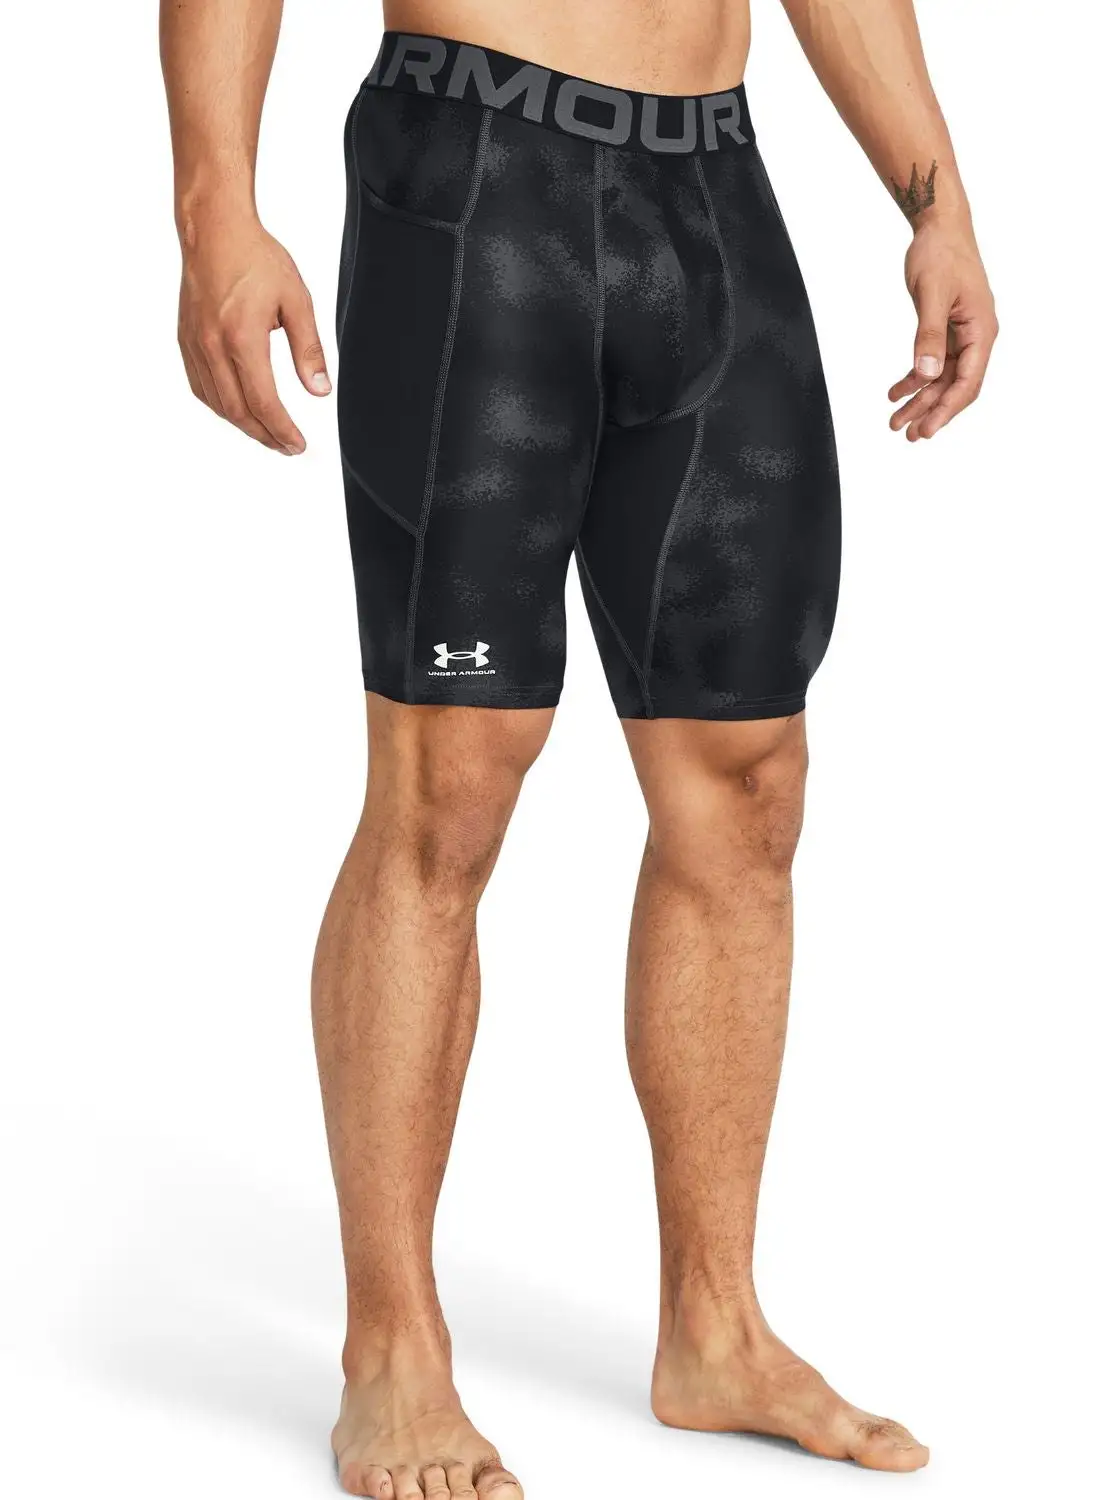 UNDER ARMOUR Heatgear Armour Printed Long Compression Shorts